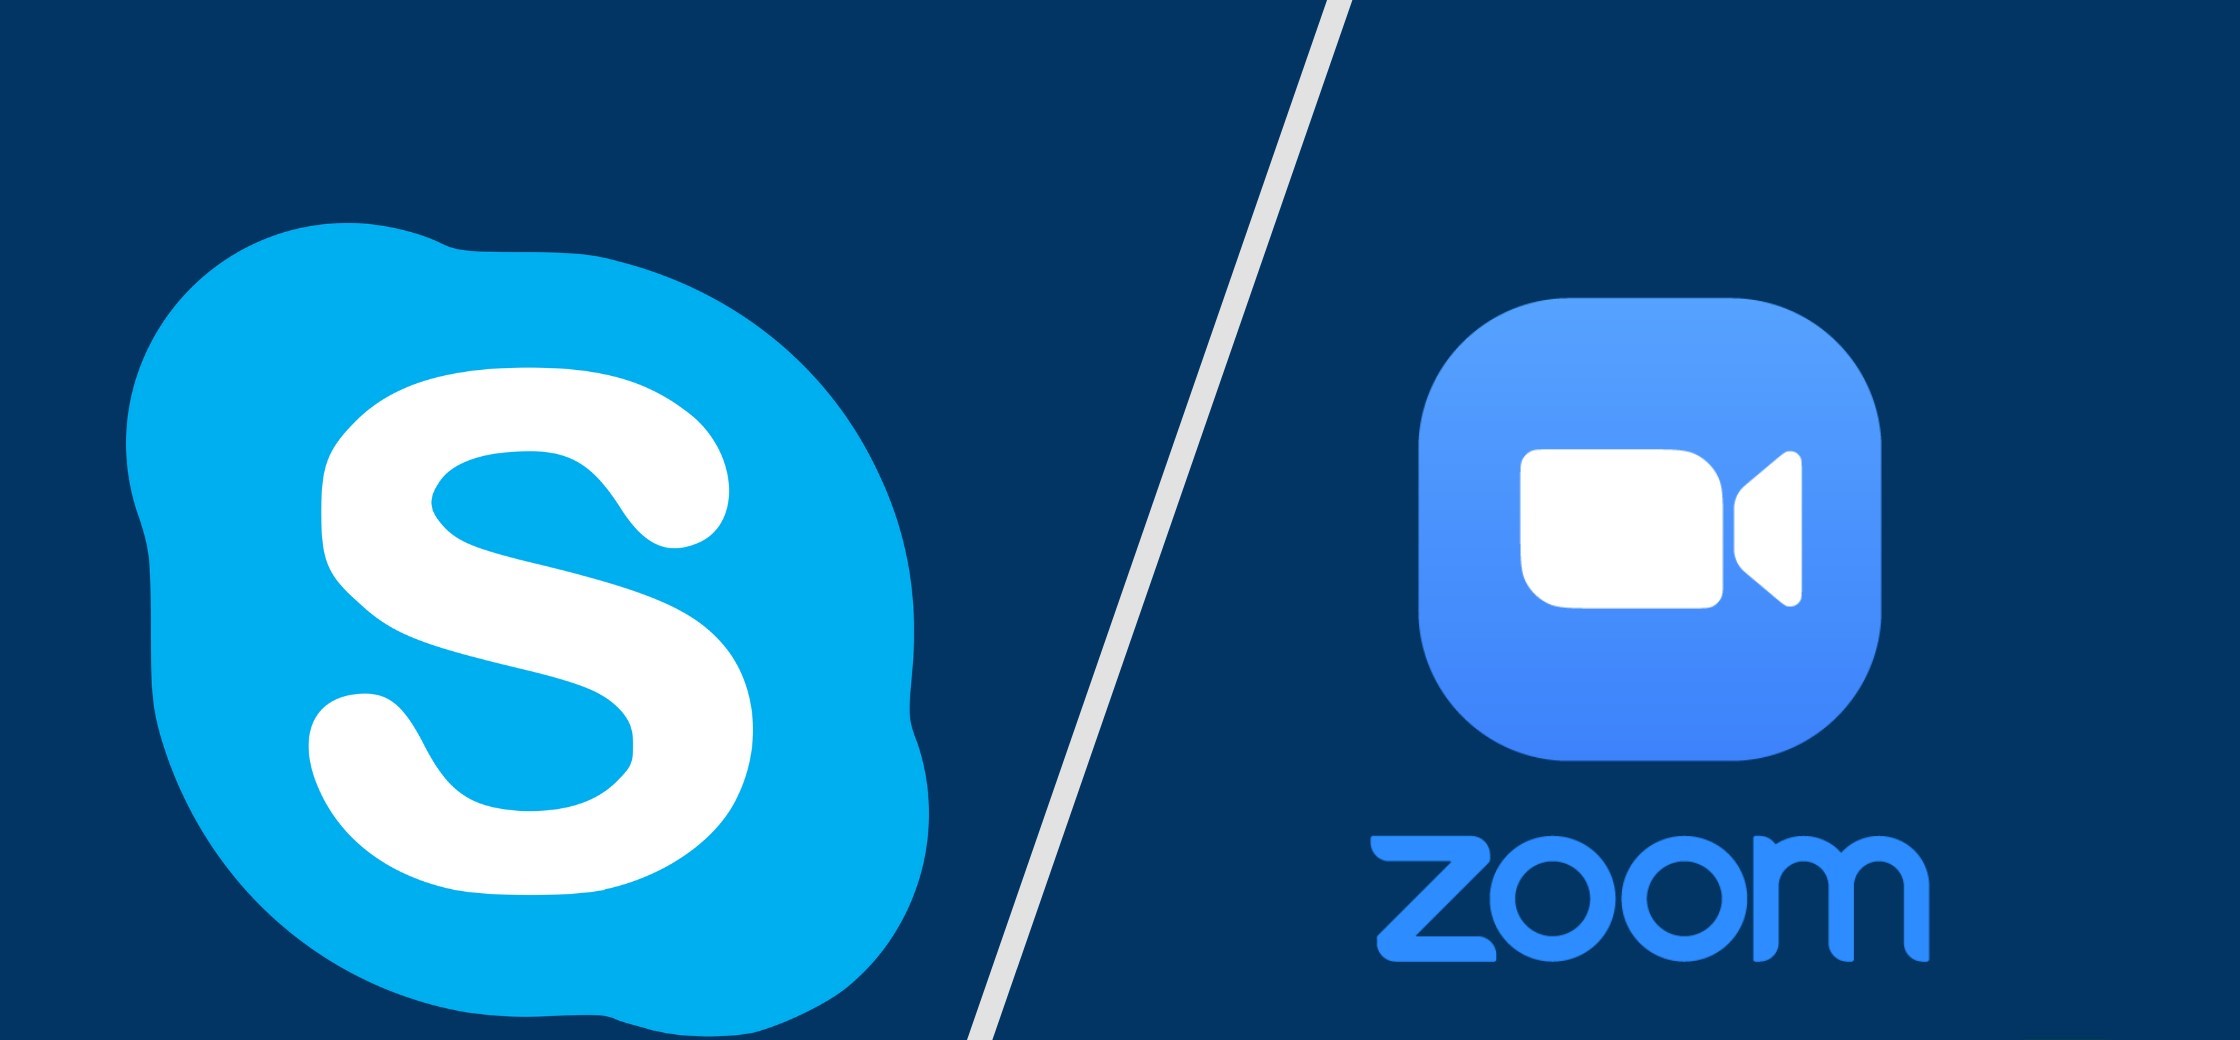 zoom-vs-skype-whats-the-difference